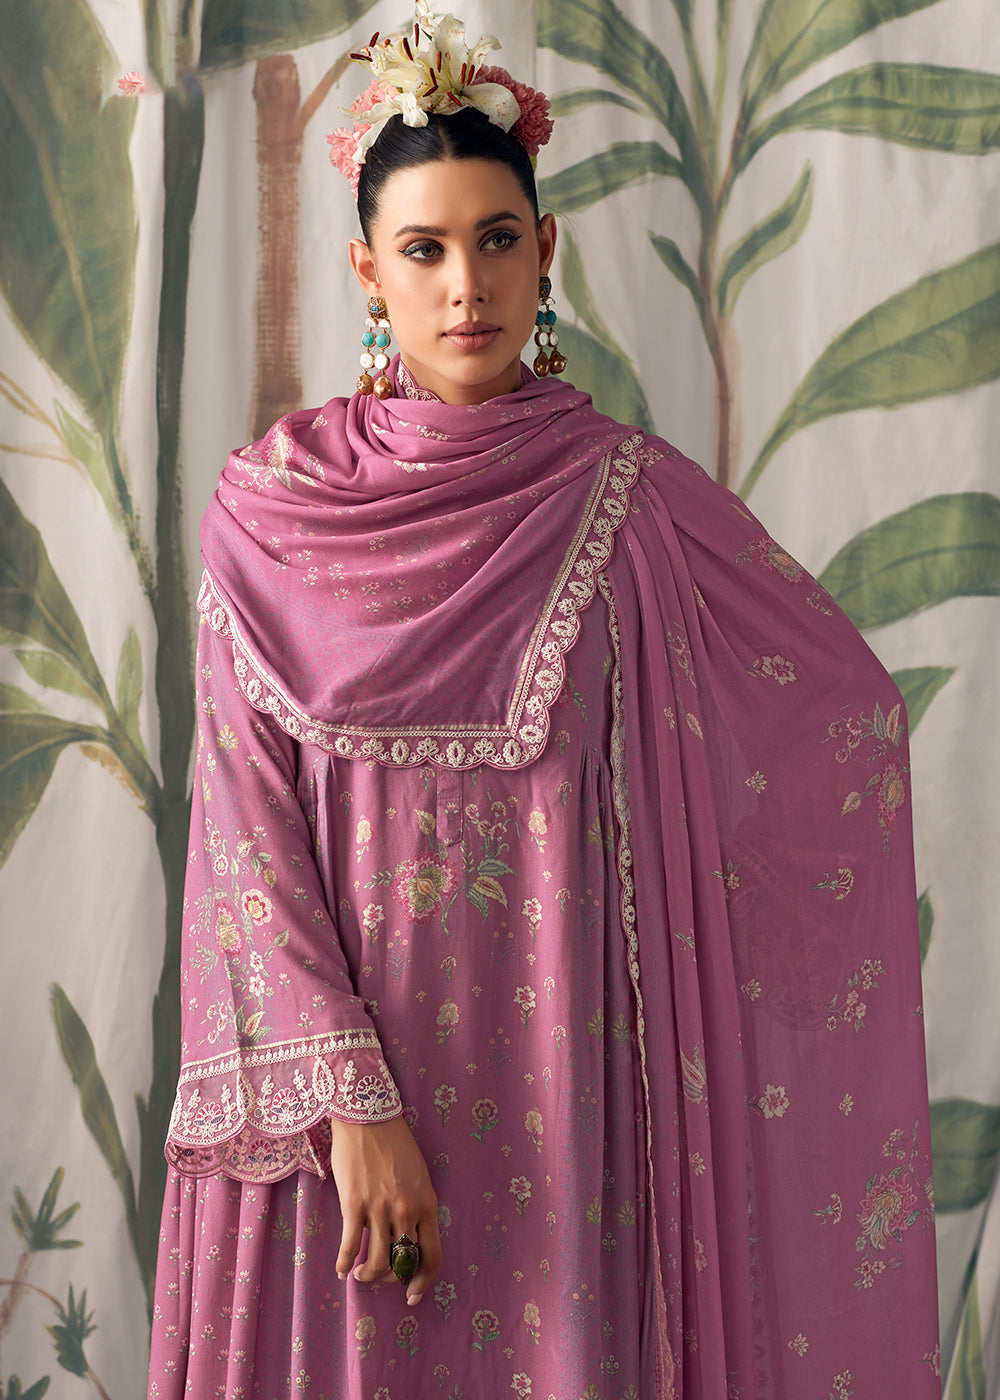 Buy Now Pink Pure Maslin Cotton Digital Printed Salwar Suit Online in USA, UK, Canada, Germany, Australia & Worldwide at Empress Clothing. 